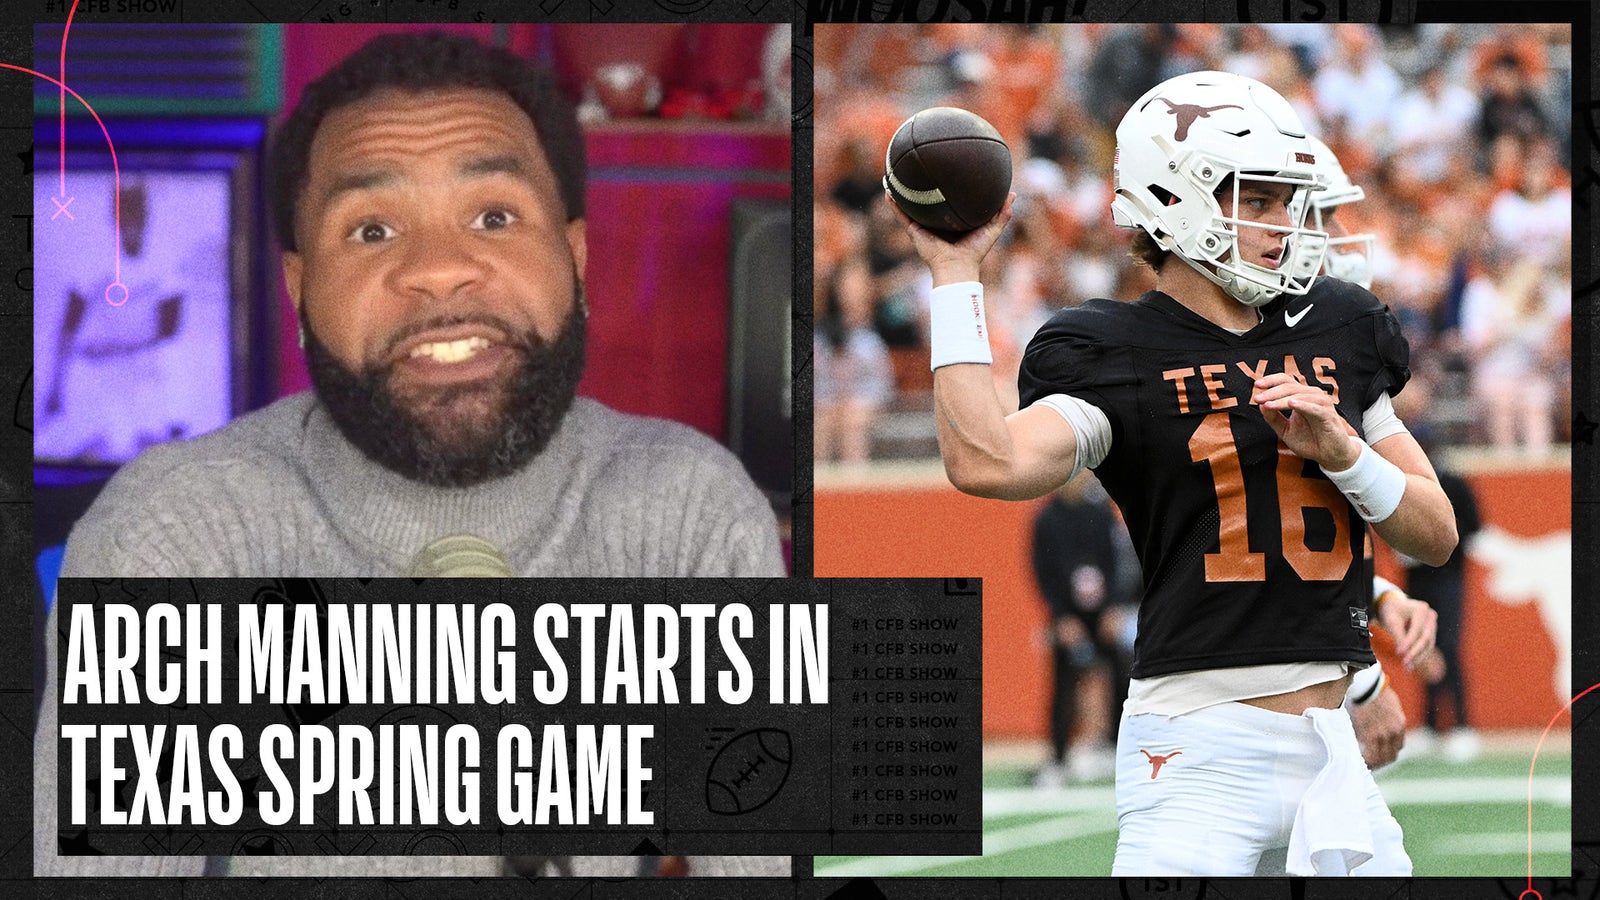 RJ Young and Dave Helman discuss the future of college quarterbacks